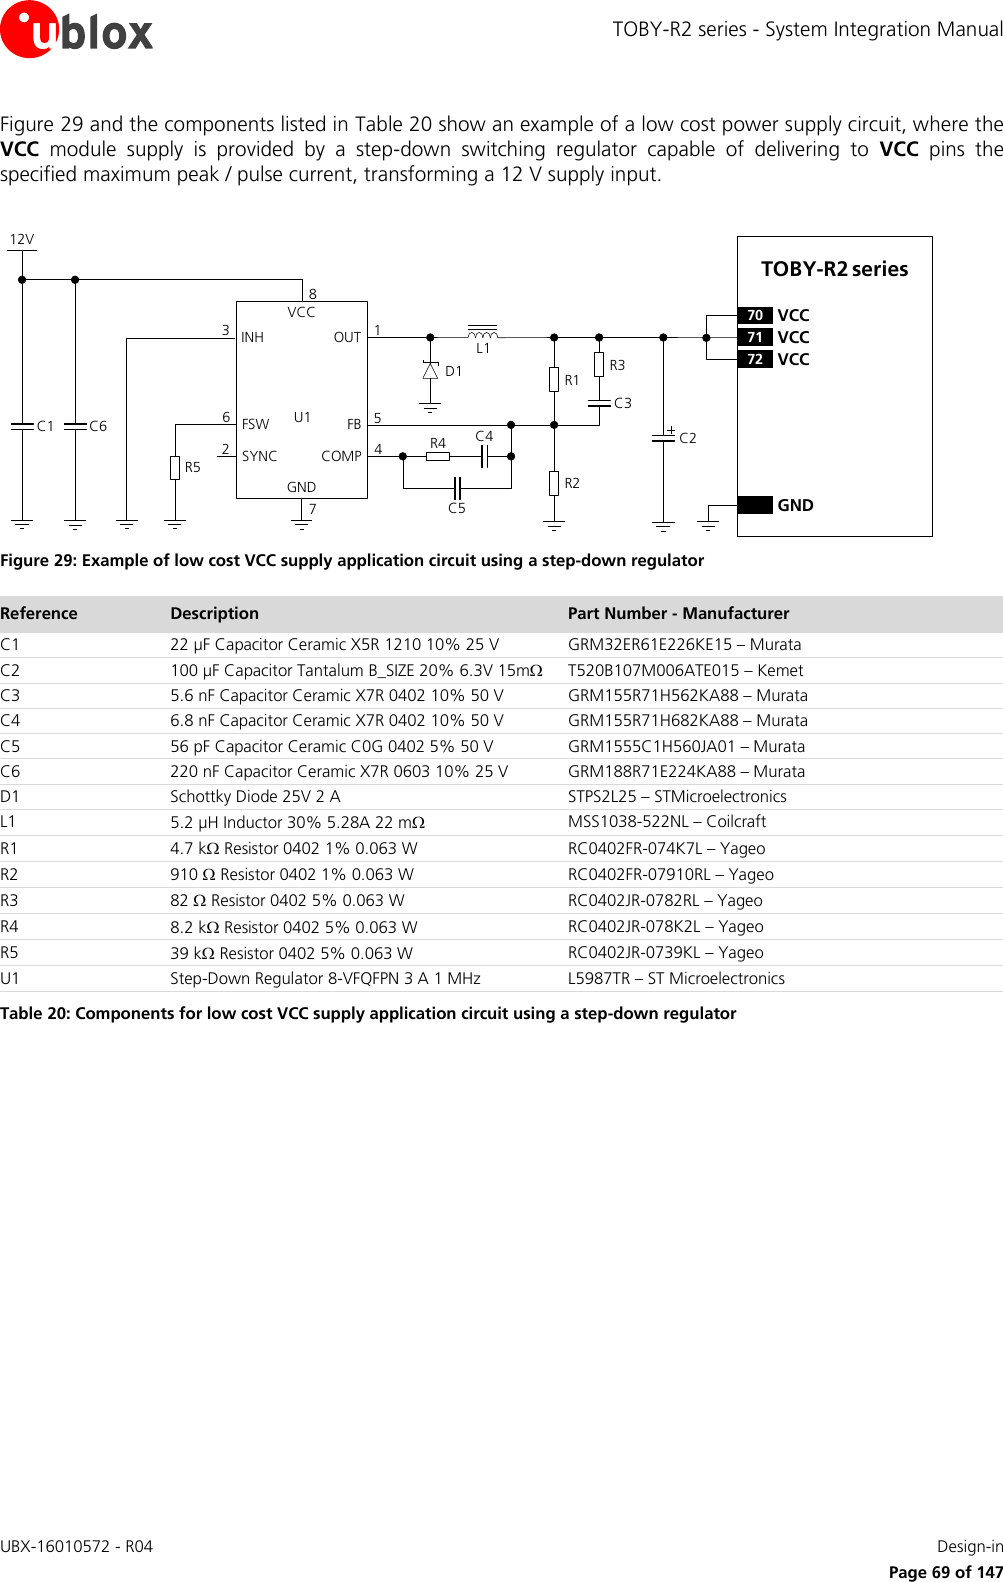 TOBY-R2 series - System Integration Manual UBX-16010572 - R04    Design-in     Page 69 of 147 Figure 29 and the components listed in Table 20 show an example of a low cost power supply circuit, where the VCC  module  supply  is  provided  by  a  step-down  switching  regulator  capable  of  delivering  to  VCC  pins  the specified maximum peak / pulse current, transforming a 12 V supply input.  TOBY-R2 series12VR5C6C1VCCINHFSWSYNCOUTGND263178C3C2D1 R1R2L1U1GNDFBCOMP54R3C4R4C571 VCC72 VCC70 VCC Figure 29: Example of low cost VCC supply application circuit using a step-down regulator Reference Description Part Number - Manufacturer C1 22 µF Capacitor Ceramic X5R 1210 10% 25 V GRM32ER61E226KE15 – Murata C2 100 µF Capacitor Tantalum B_SIZE 20% 6.3V 15m T520B107M006ATE015 – Kemet C3 5.6 nF Capacitor Ceramic X7R 0402 10% 50 V GRM155R71H562KA88 – Murata C4  6.8 nF Capacitor Ceramic X7R 0402 10% 50 V GRM155R71H682KA88 – Murata C5 56 pF Capacitor Ceramic C0G 0402 5% 50 V GRM1555C1H560JA01 – Murata C6 220 nF Capacitor Ceramic X7R 0603 10% 25 V GRM188R71E224KA88 – Murata D1 Schottky Diode 25V 2 A STPS2L25 – STMicroelectronics L1 5.2 µH Inductor 30% 5.28A 22 m MSS1038-522NL – Coilcraft R1 4.7 k Resistor 0402 1% 0.063 W RC0402FR-074K7L – Yageo R2 910  Resistor 0402 1% 0.063 W RC0402FR-07910RL – Yageo R3 82  Resistor 0402 5% 0.063 W RC0402JR-0782RL – Yageo R4 8.2 k Resistor 0402 5% 0.063 W RC0402JR-078K2L – Yageo R5 39 k Resistor 0402 5% 0.063 W RC0402JR-0739KL – Yageo U1 Step-Down Regulator 8-VFQFPN 3 A 1 MHz L5987TR – ST Microelectronics Table 20: Components for low cost VCC supply application circuit using a step-down regulator  